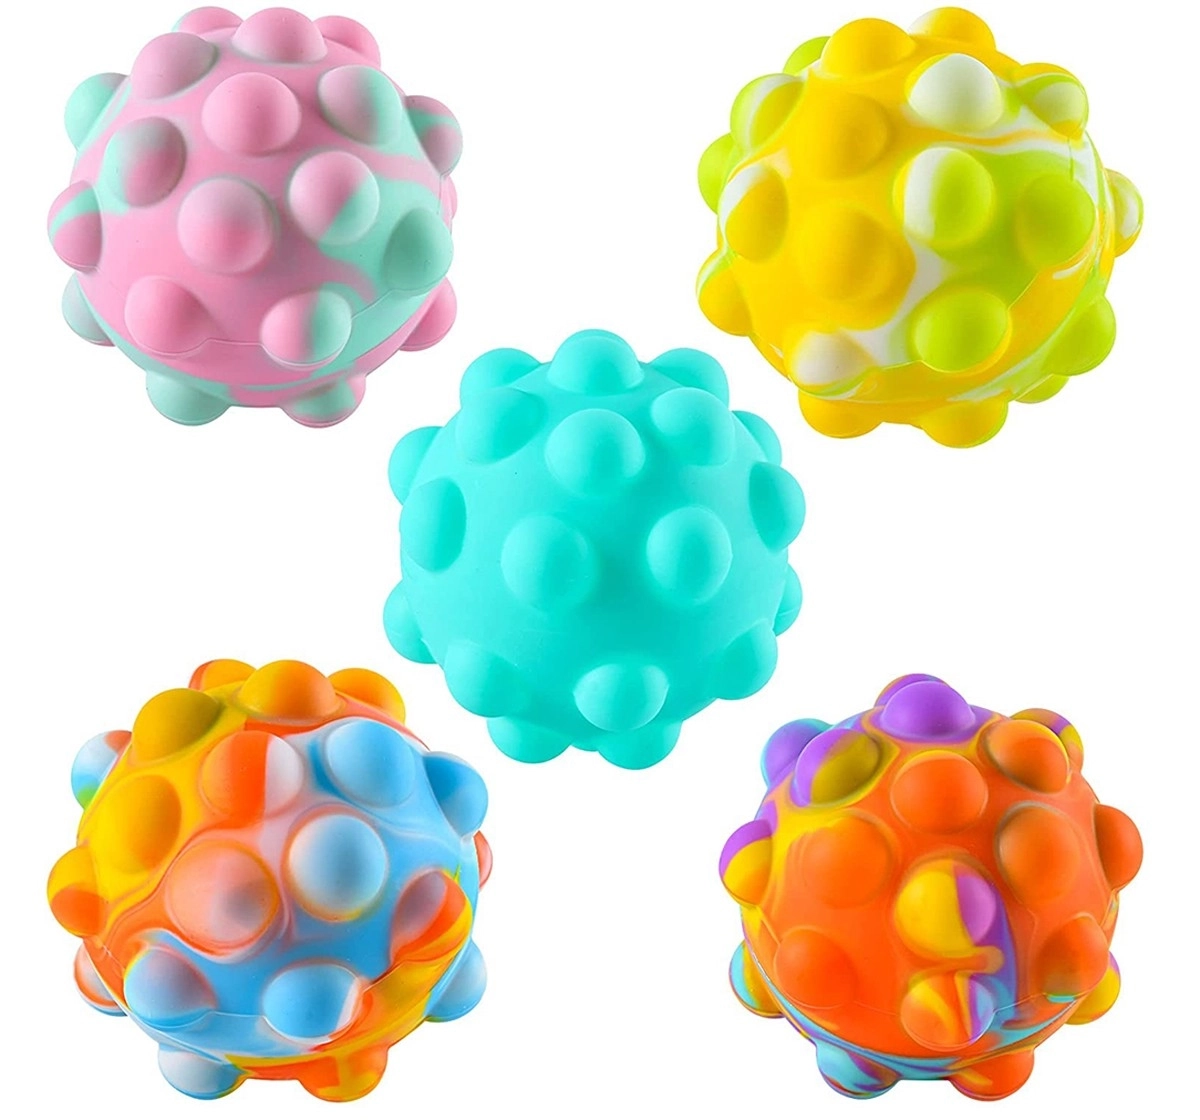 3D Round Pop it Ball with Bubbles, Stress Relieve Sensory Fidgets Toys for Kids and Adults, Multicolour, 3Y+